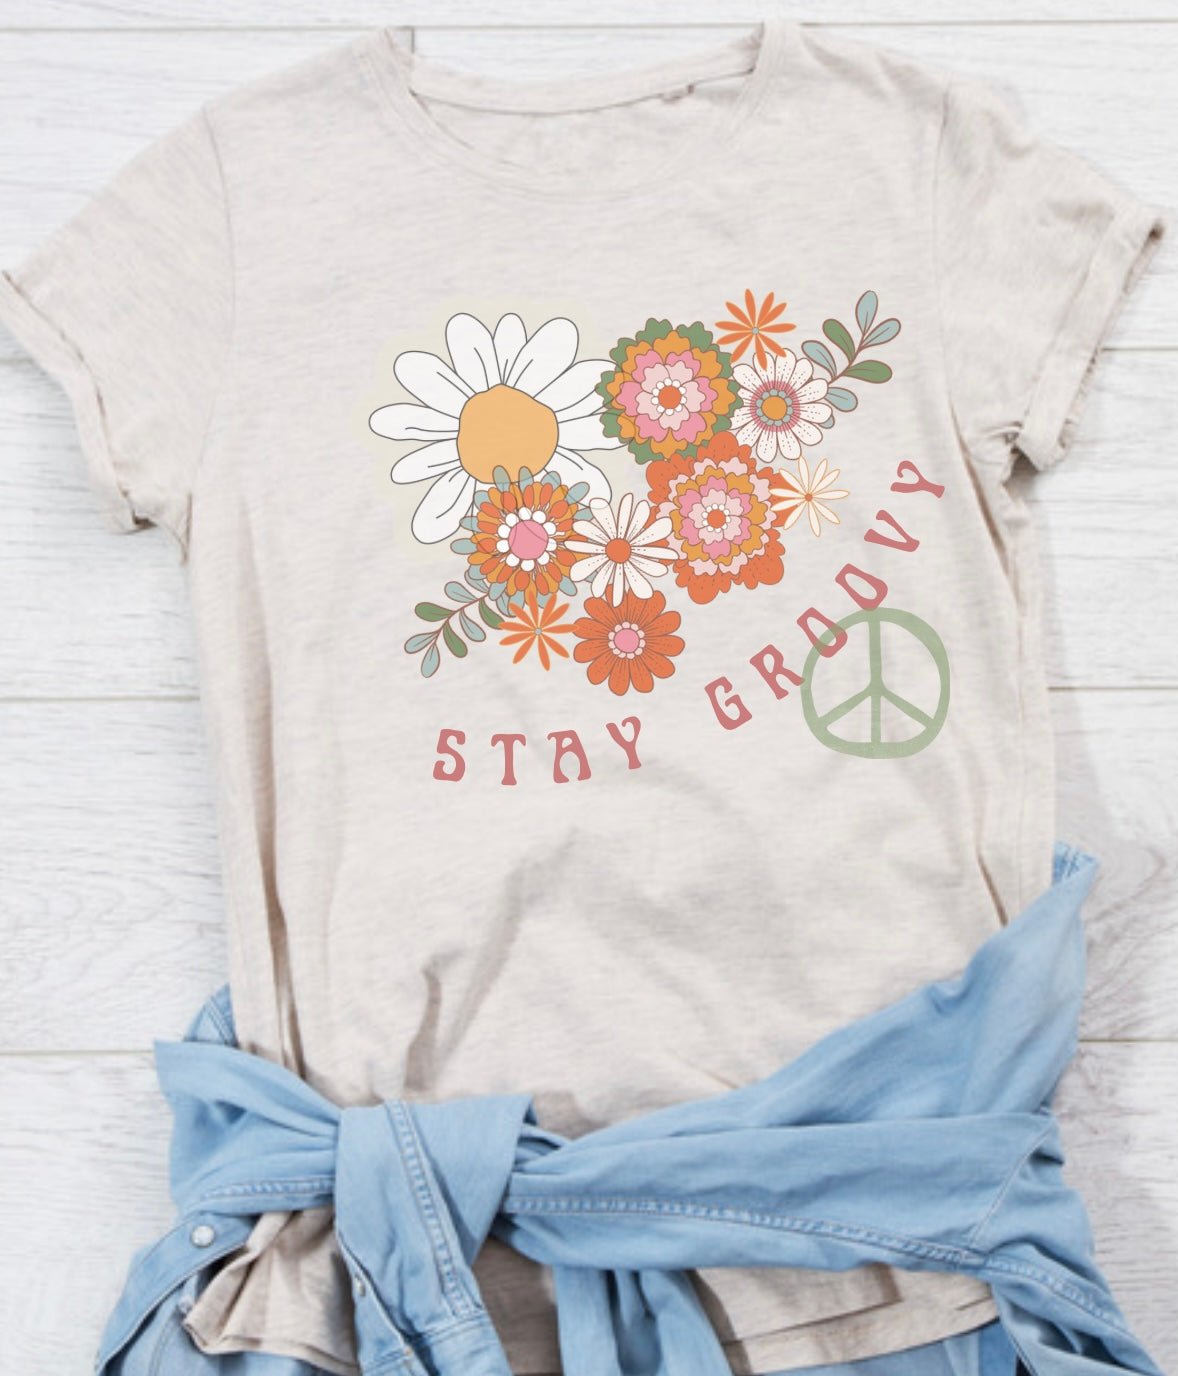 Stay Groovy Graphic Tee